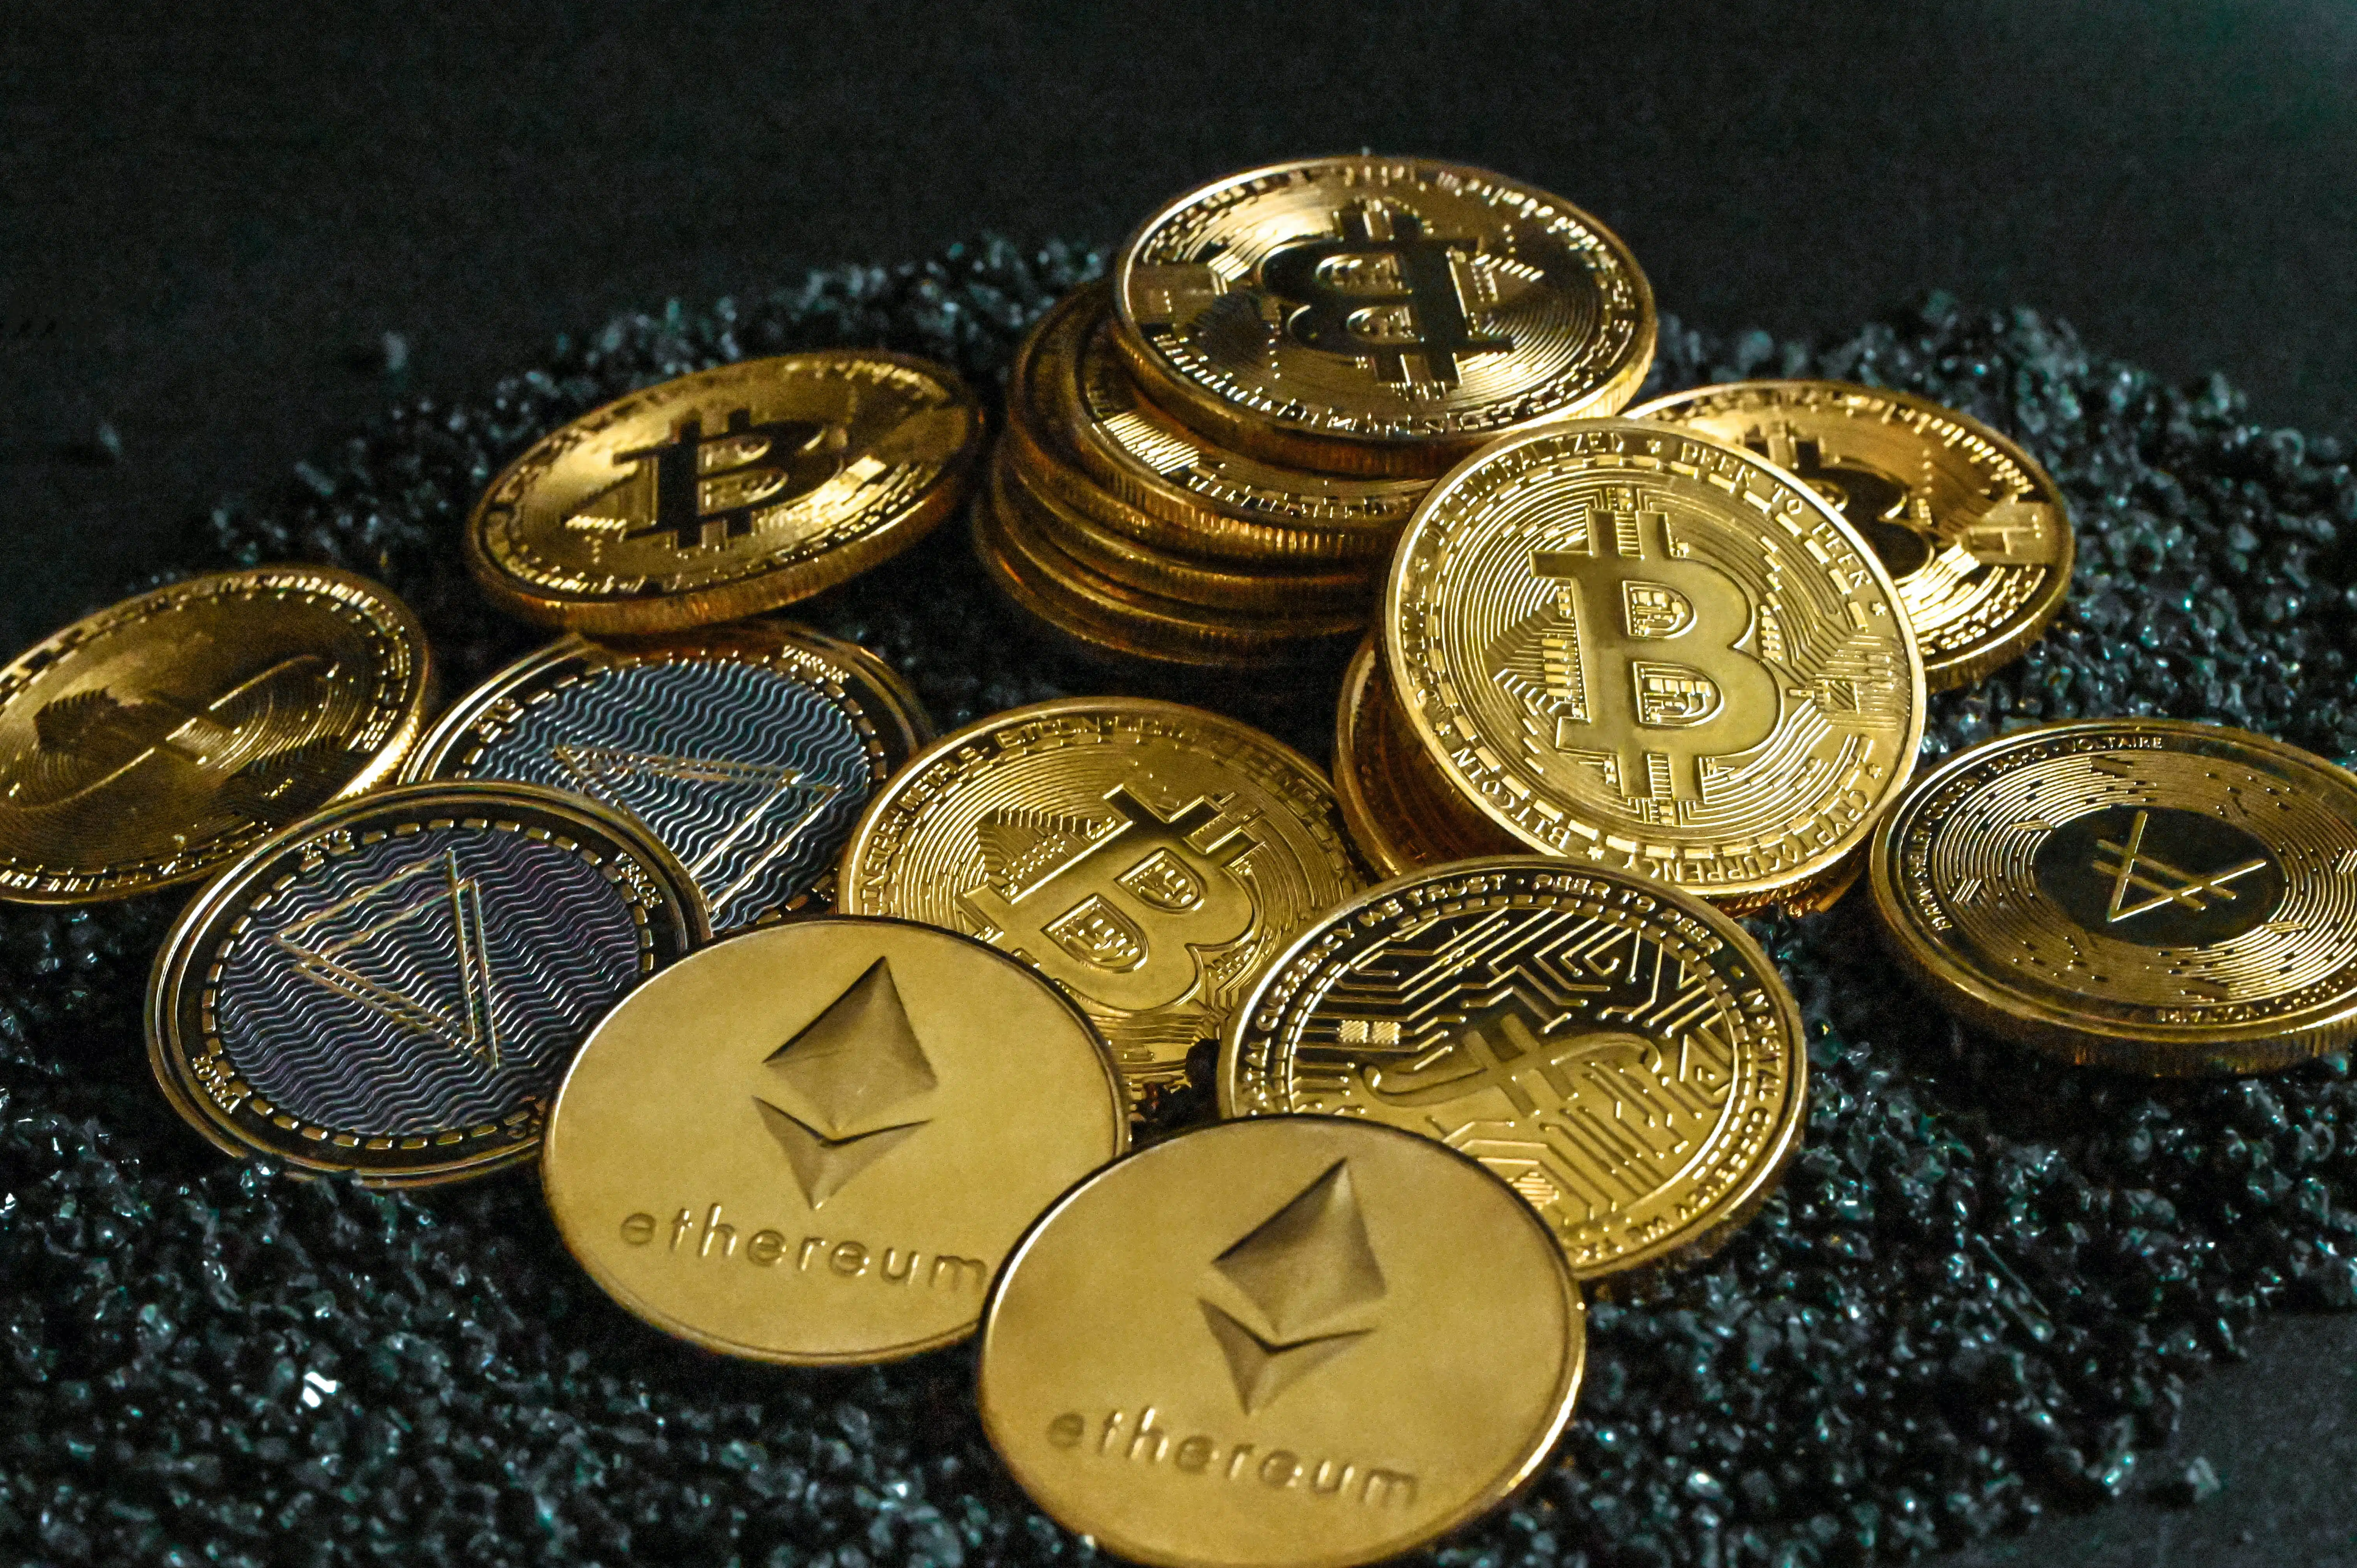 Majority of crypto tokens meet investment contract test: SEC Chair Gensler